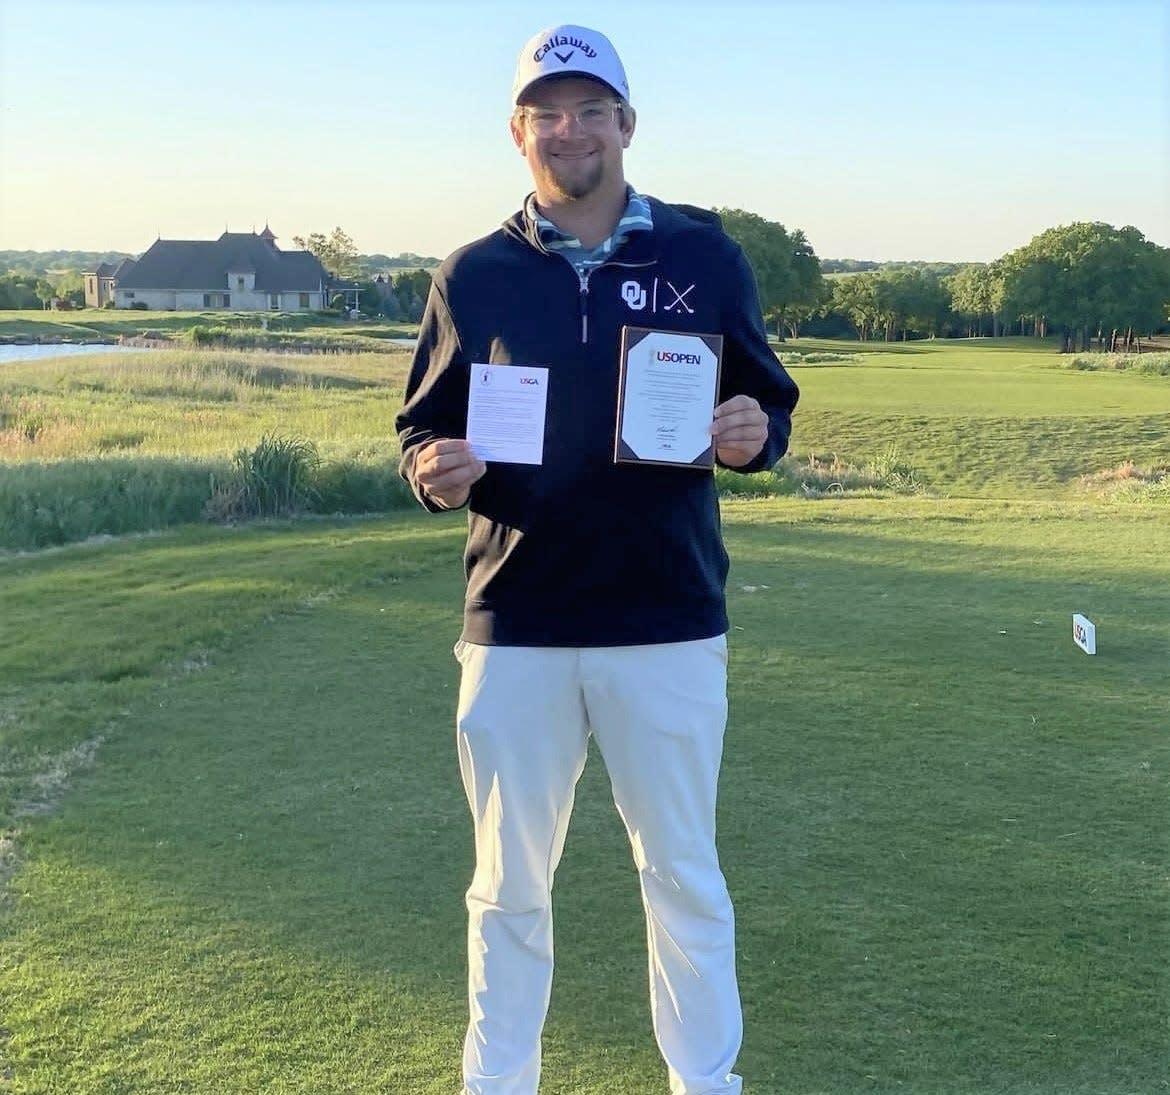 Cheboygan native and golfer PJ Maybank III will have another shot to qualify for the United States Open after finishing third at a local qualifier in Oklahoma on Monday.